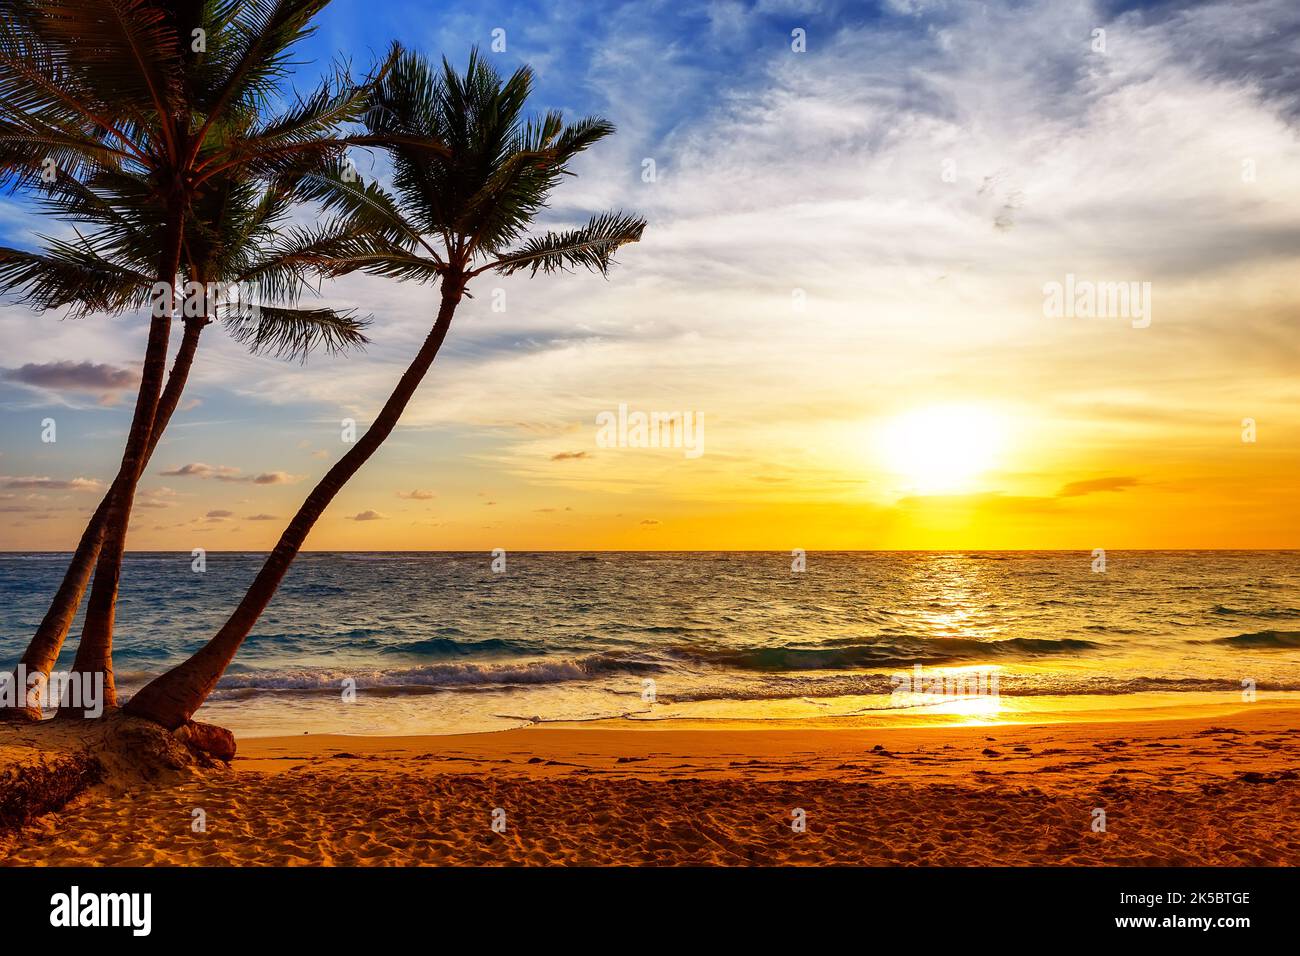 Silhouette of coconut palm trees against beautiful sunset on the tropical sea beach in Punta Cana, Dominican Republic. Stock Photo